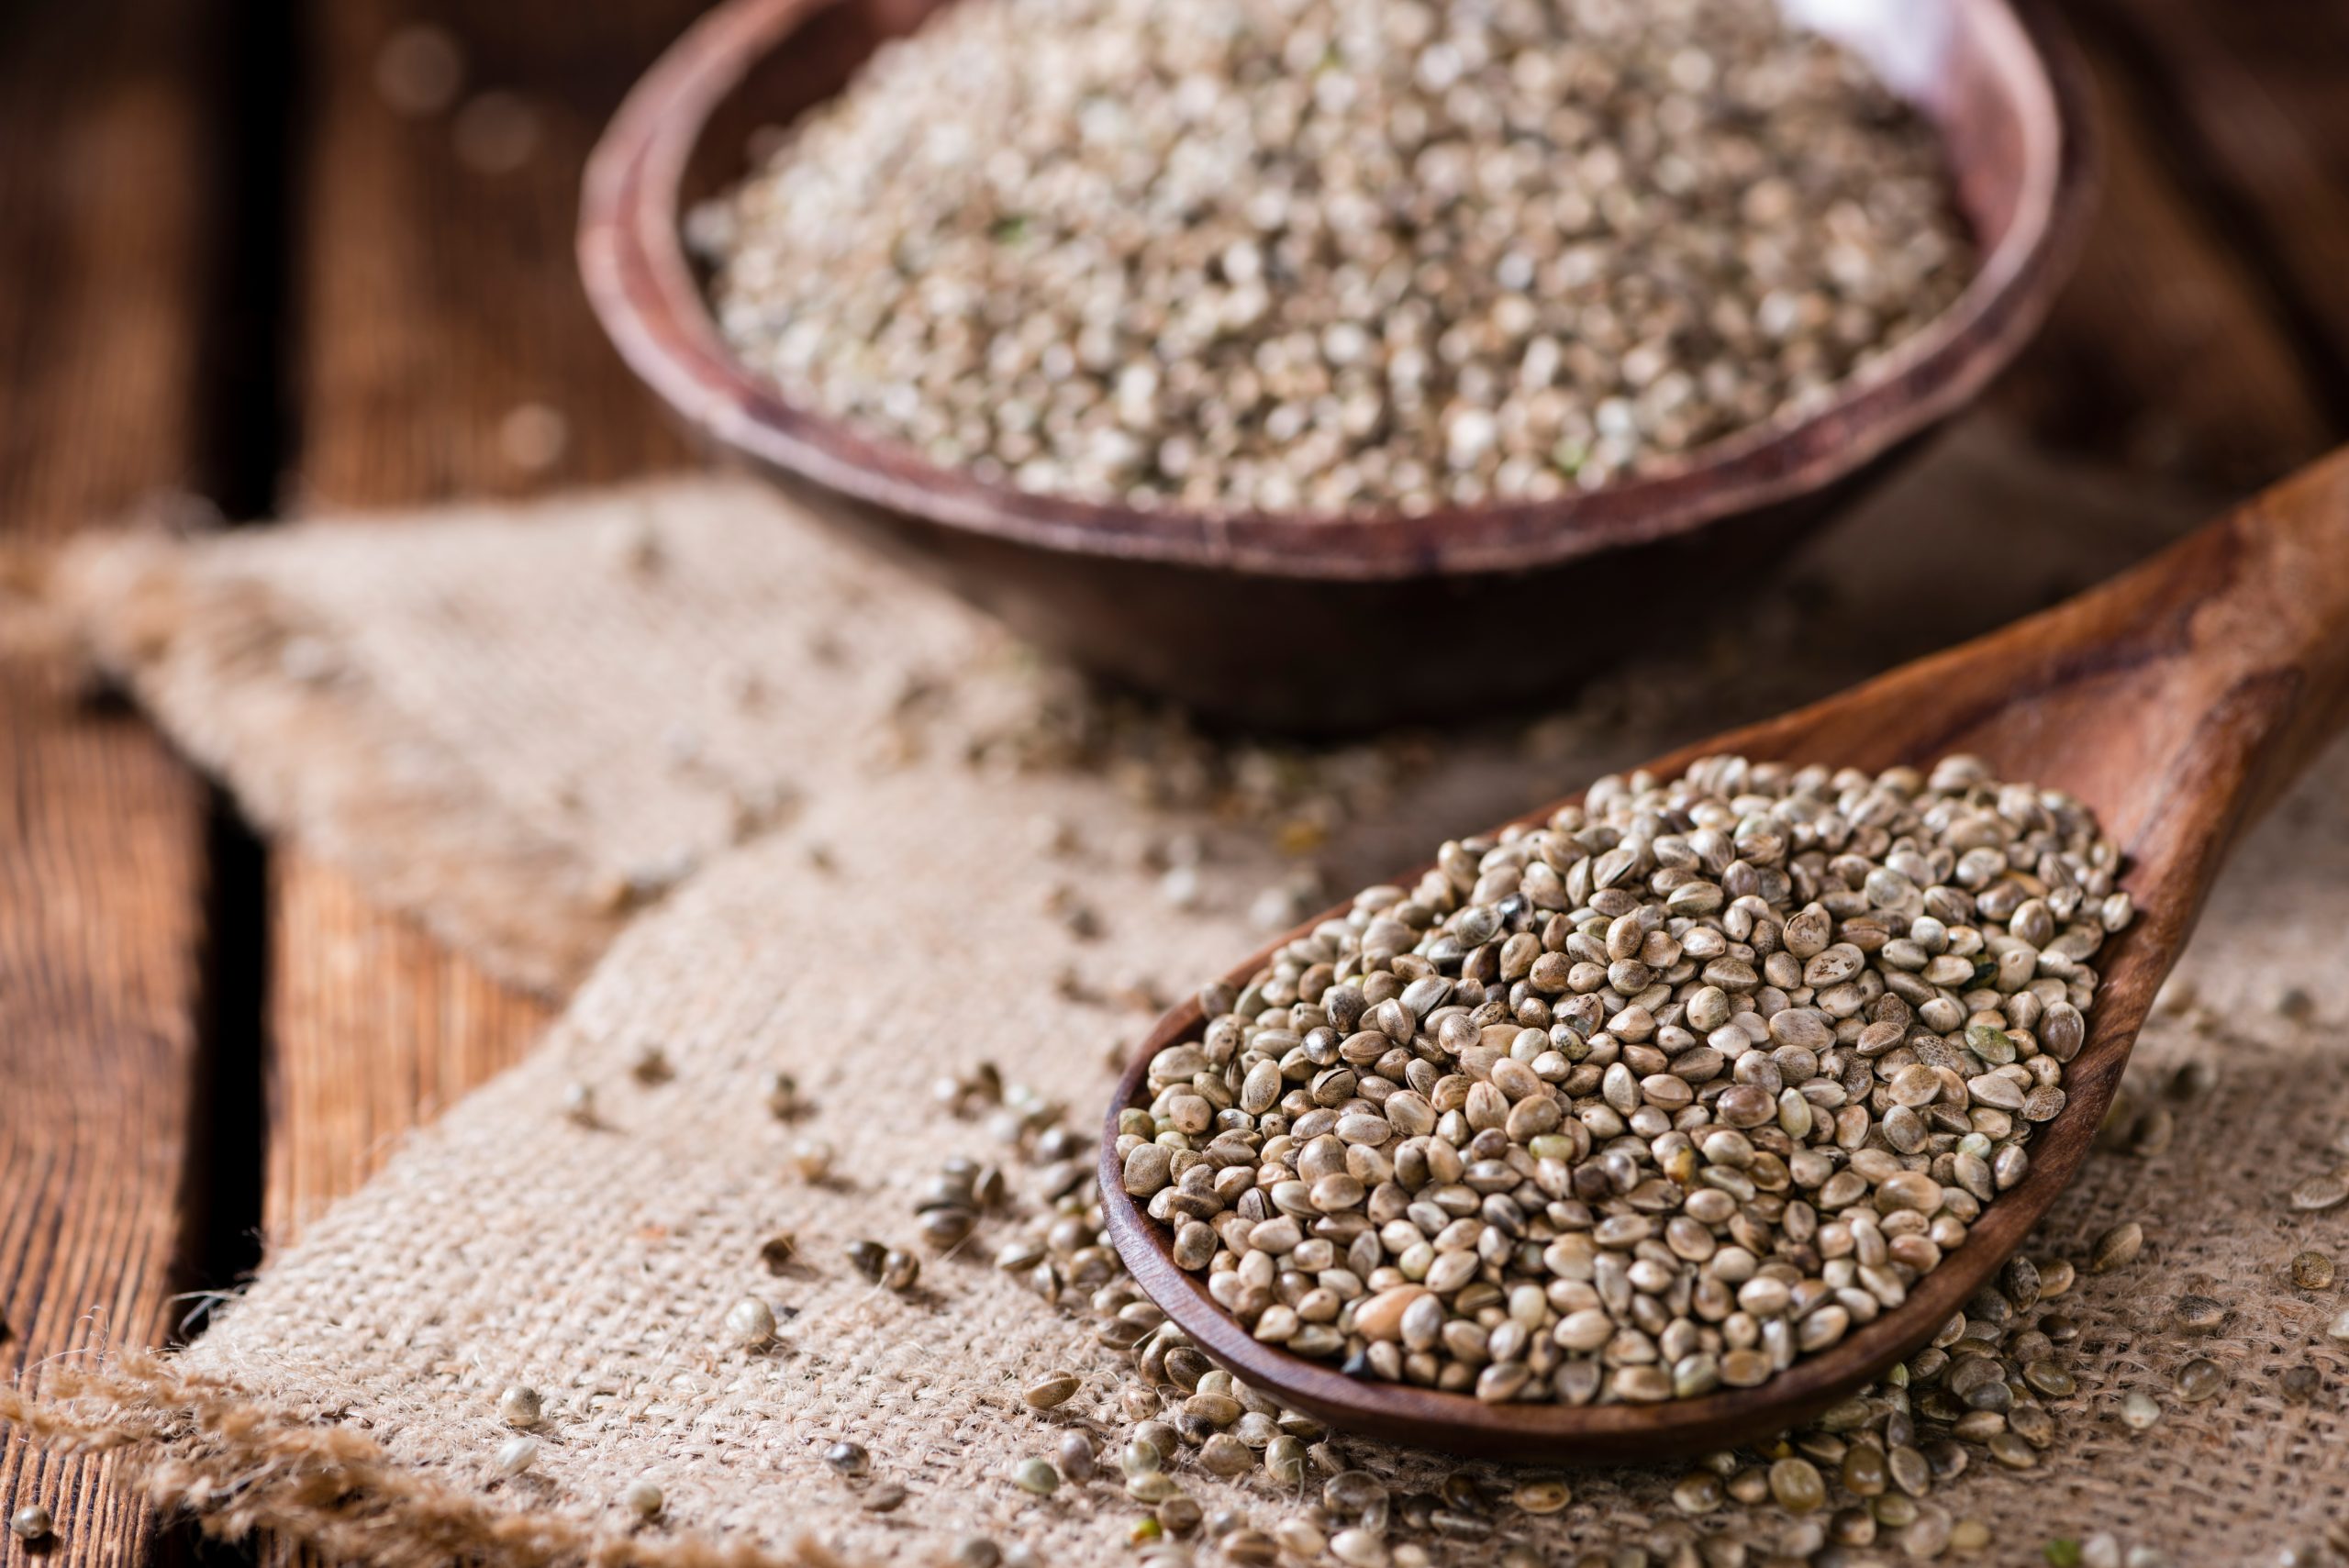 Portion,Of,Hemp,Seeds,(close-up,Shot),On,An,Old,Wooden